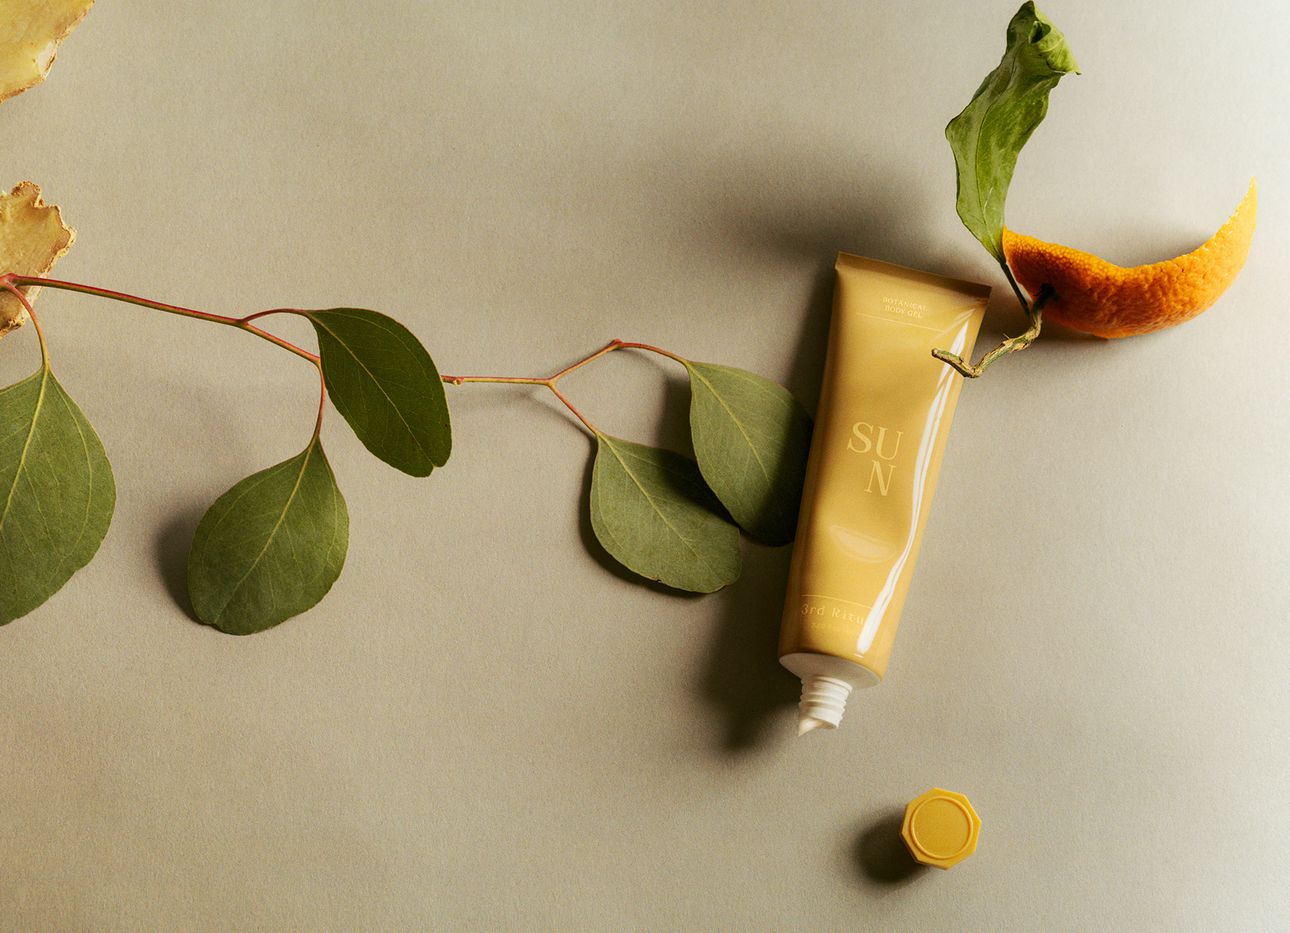 3rd Ritual's Sun balm in a yellow squeeze tube, on top of a leaf and orange rind.